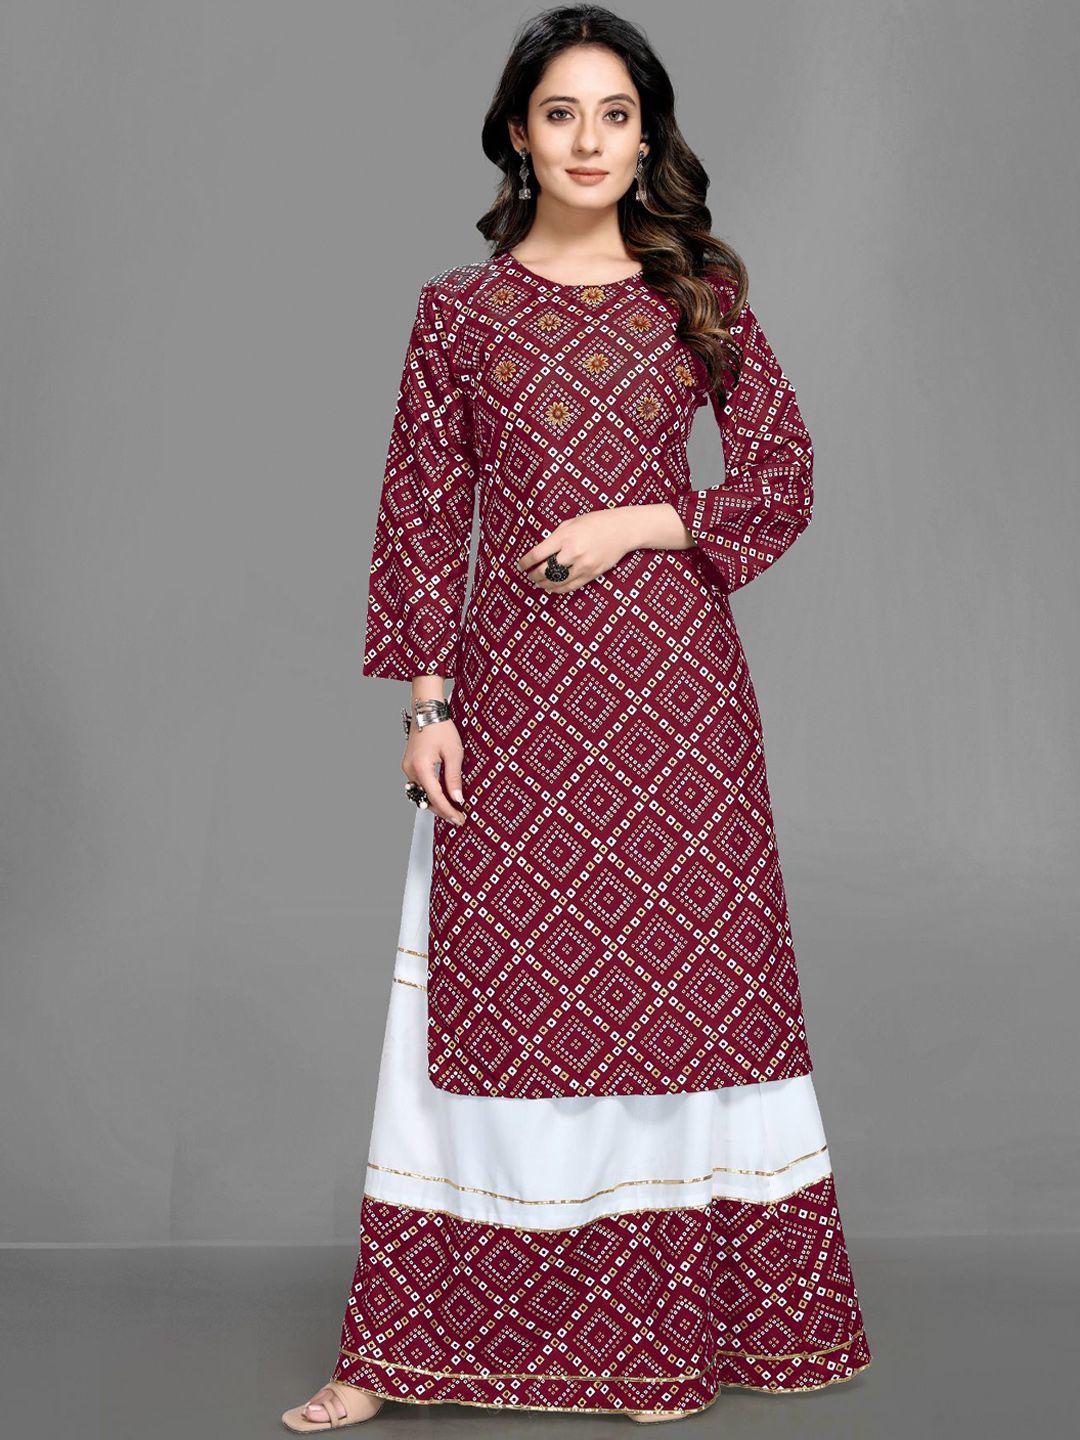 queenswear creation women maroon ethnic motifs printed beads and stones pure cotton kurta with skirt